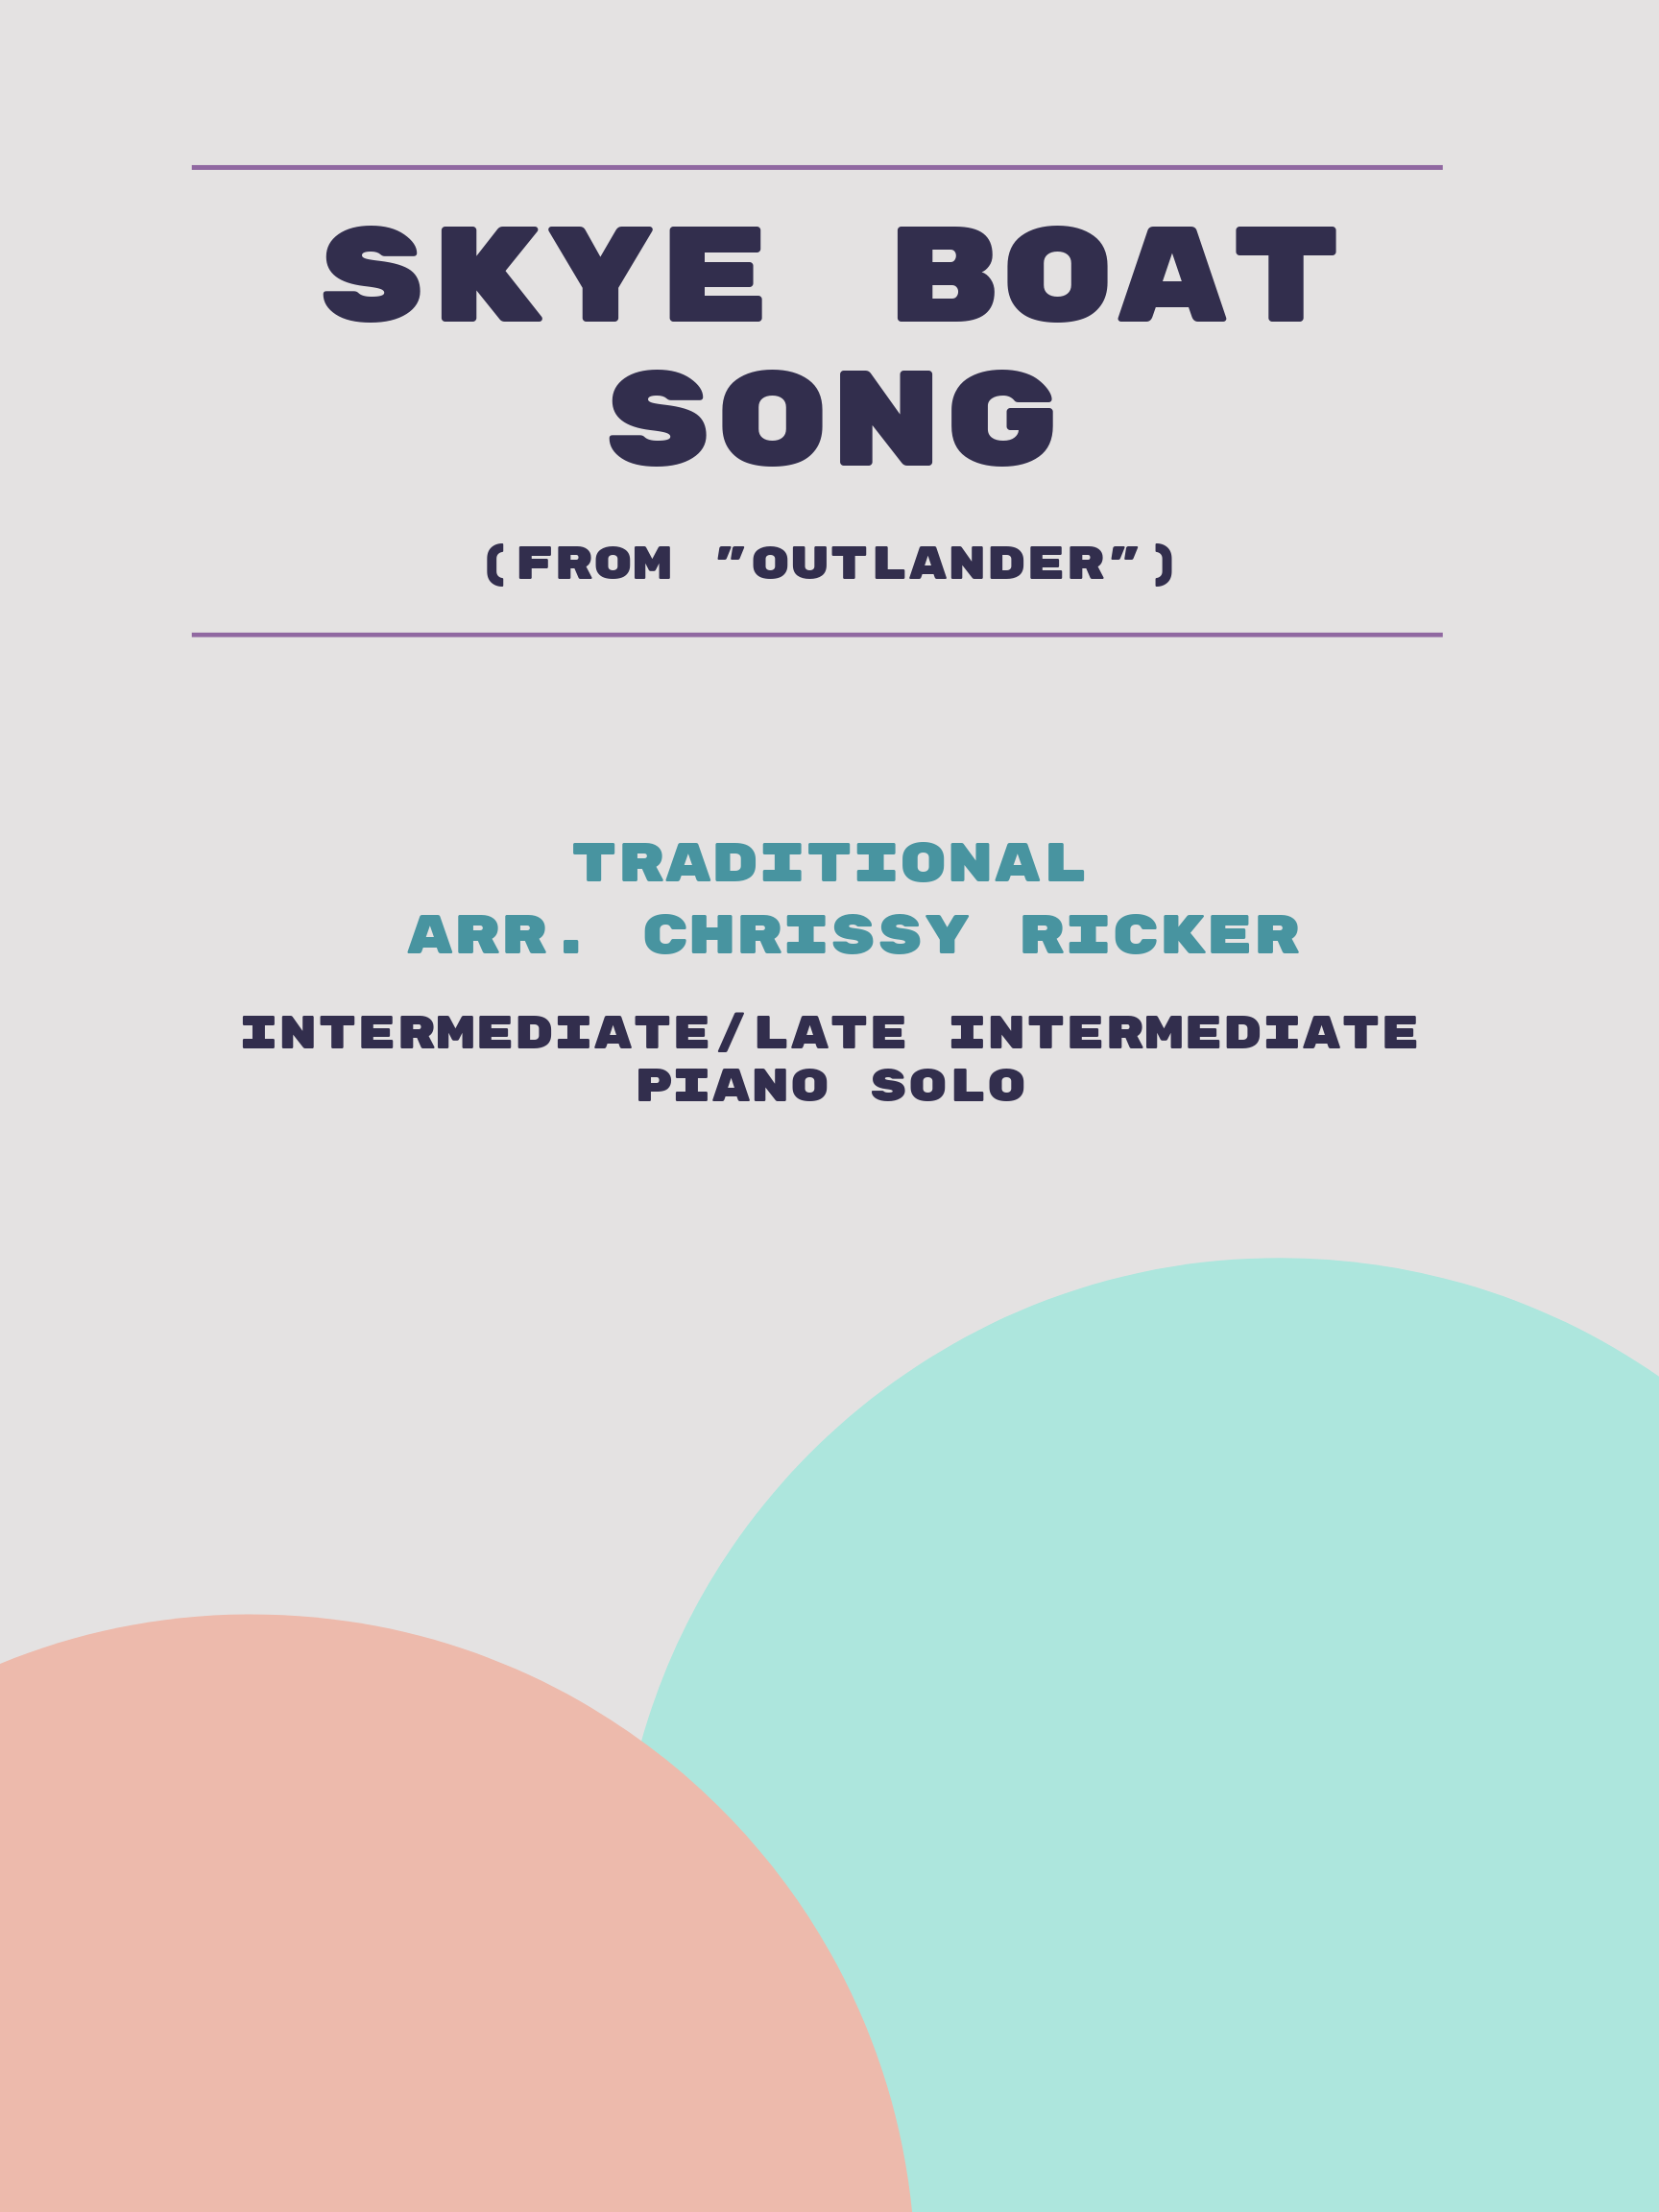 Skye Boat Song by Traditional